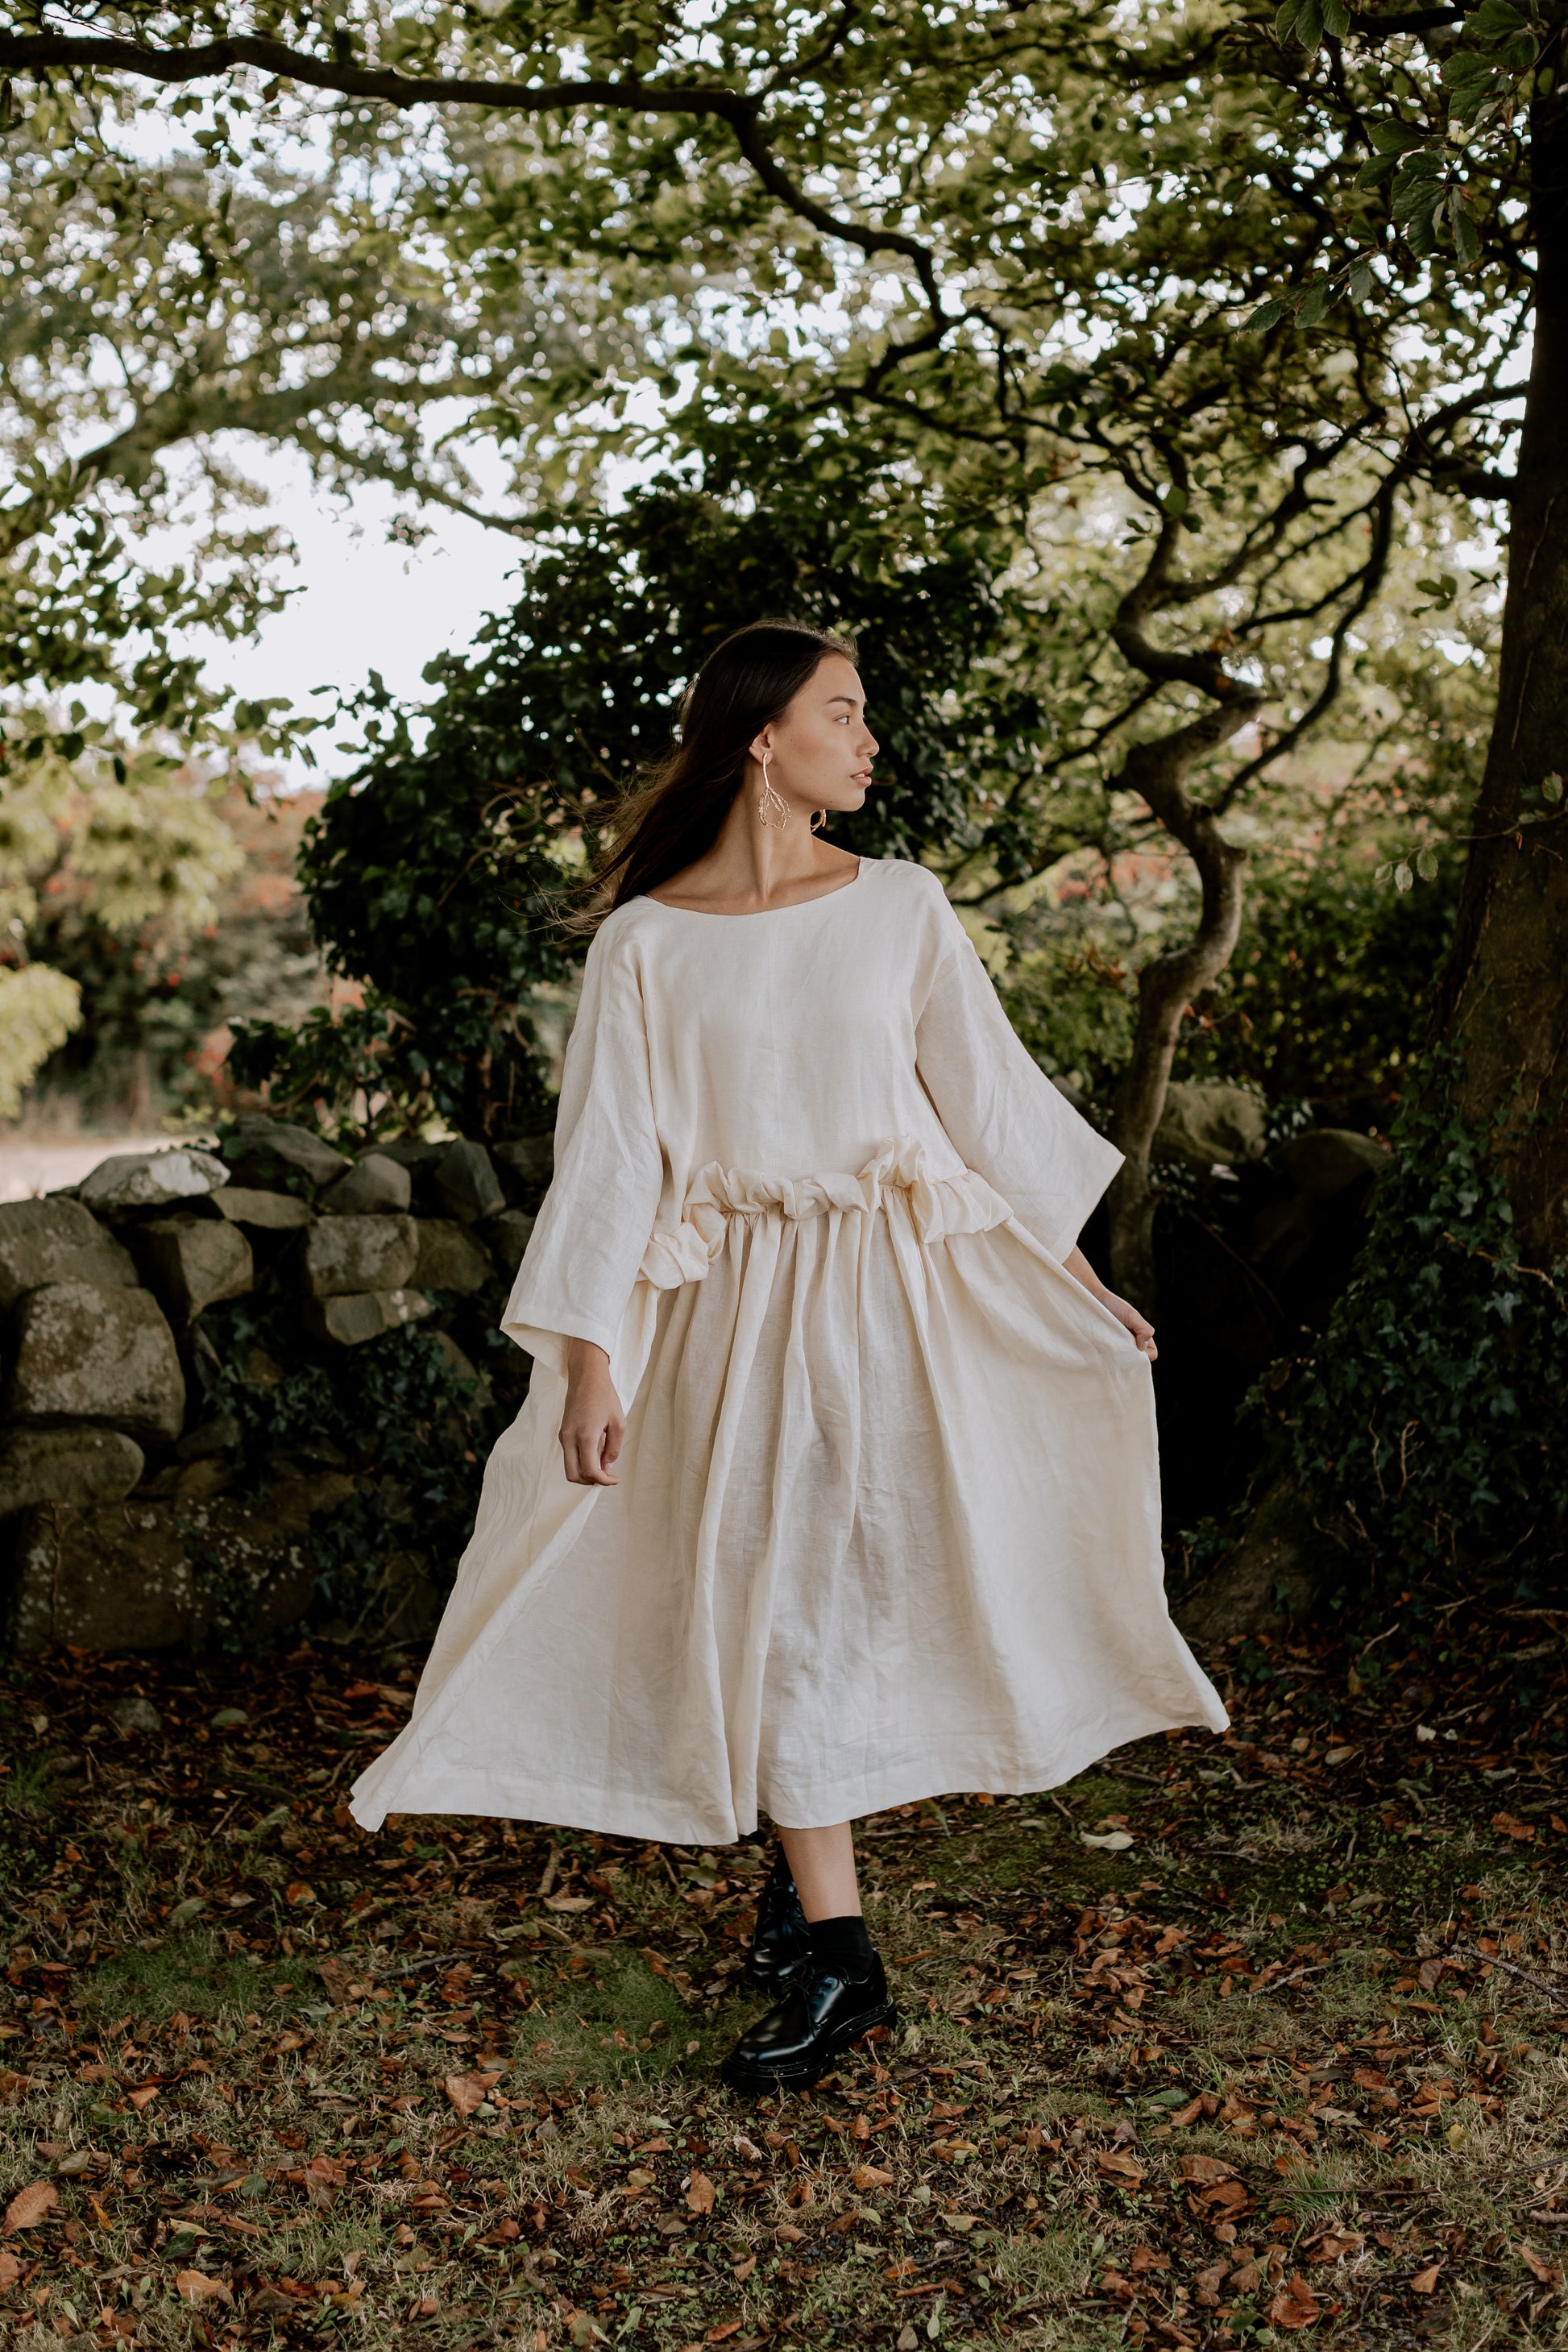 THE PUFF DRESS | MALLOW | Our playful party dress this season.An effortless and feminine silhouette with a playful burst of puffed linen at the waist. Can be worn both ways, with 'V' to the front or back. The 'mallow' colourway features a subtle line of g